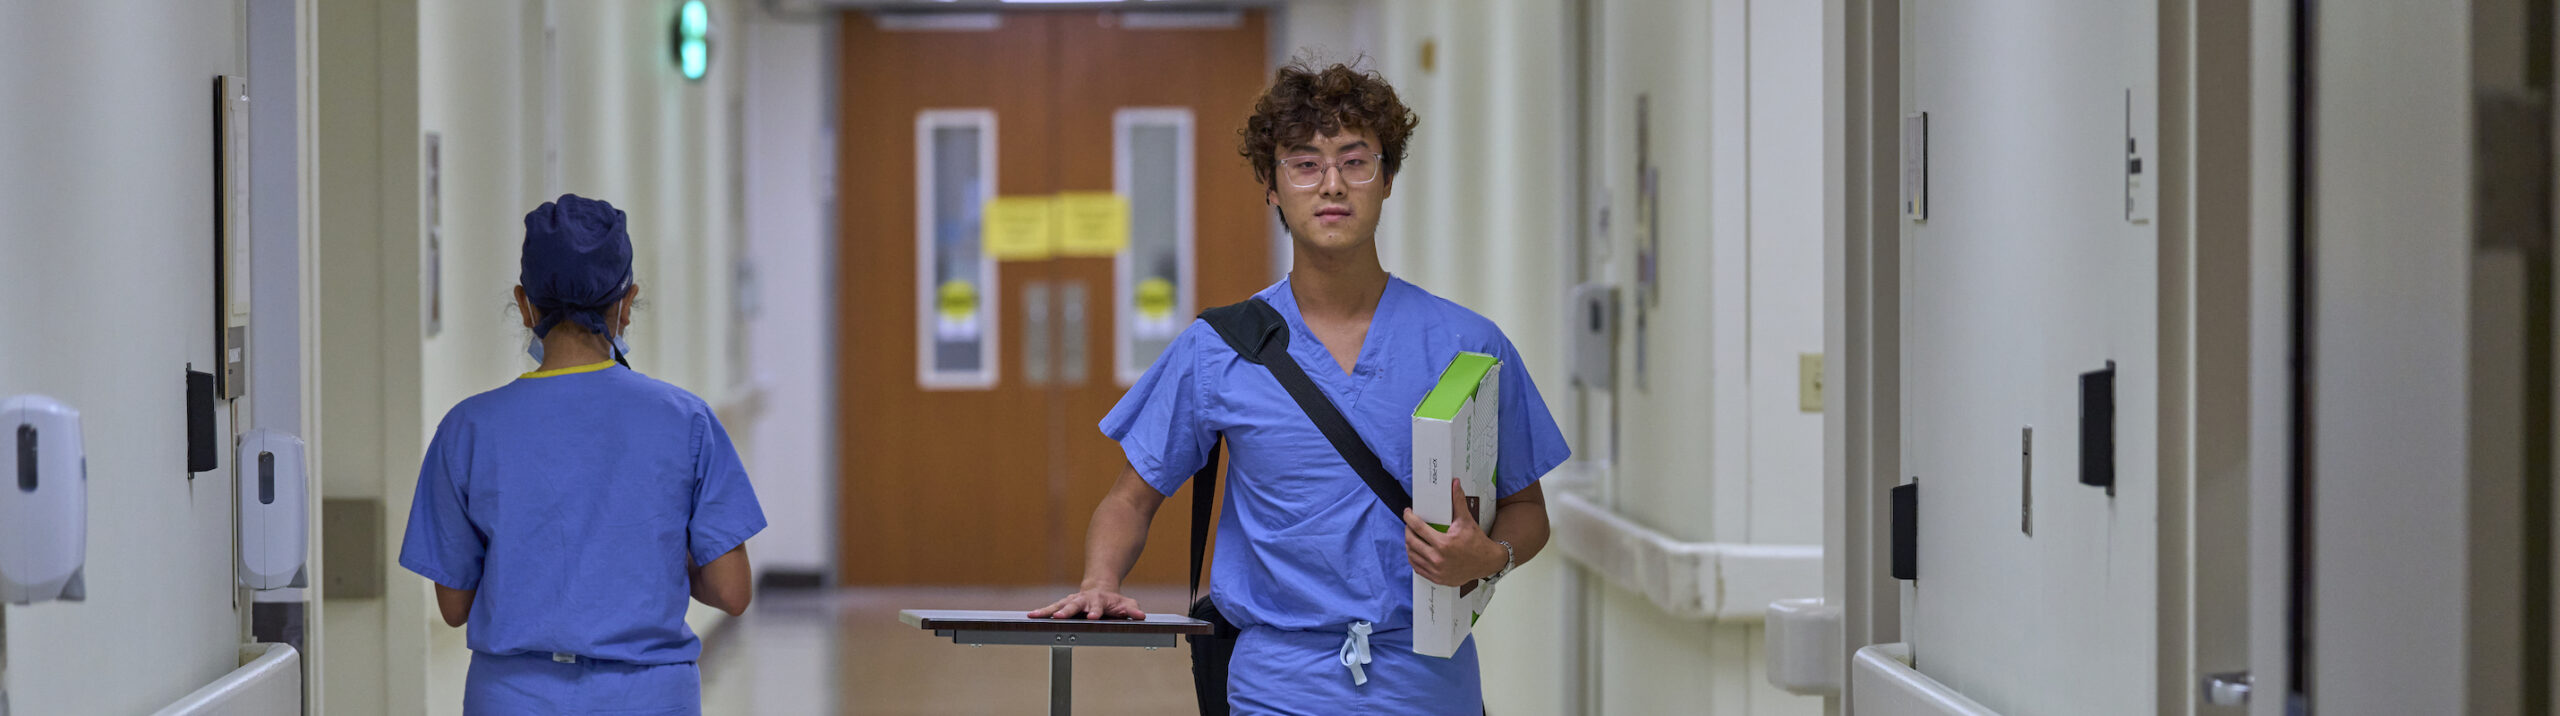 Student in scrubs walking down hall